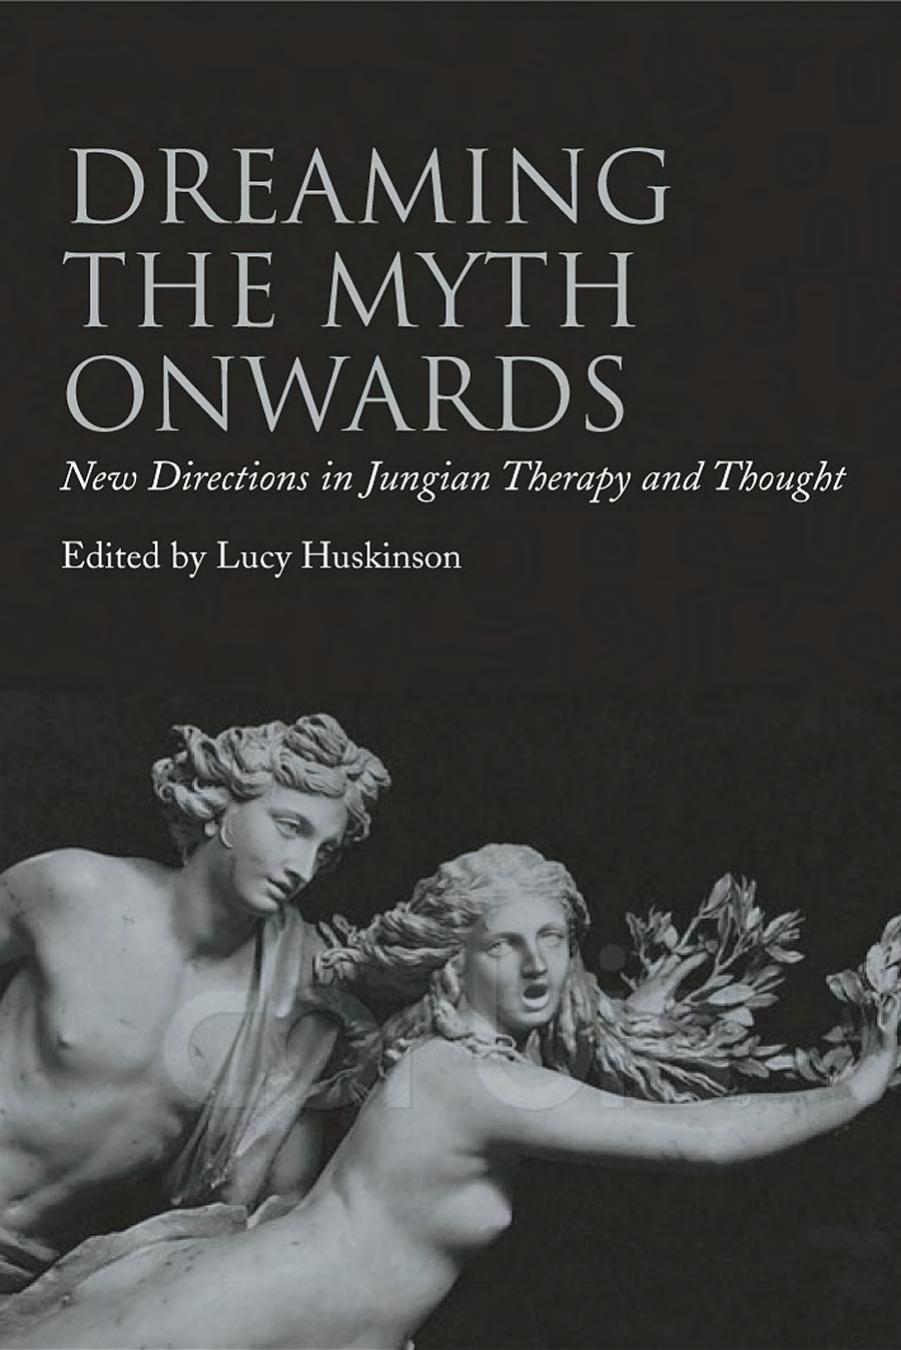 Dreaming the Myth Onwards: New Directions in Jungian Therapy and Thought